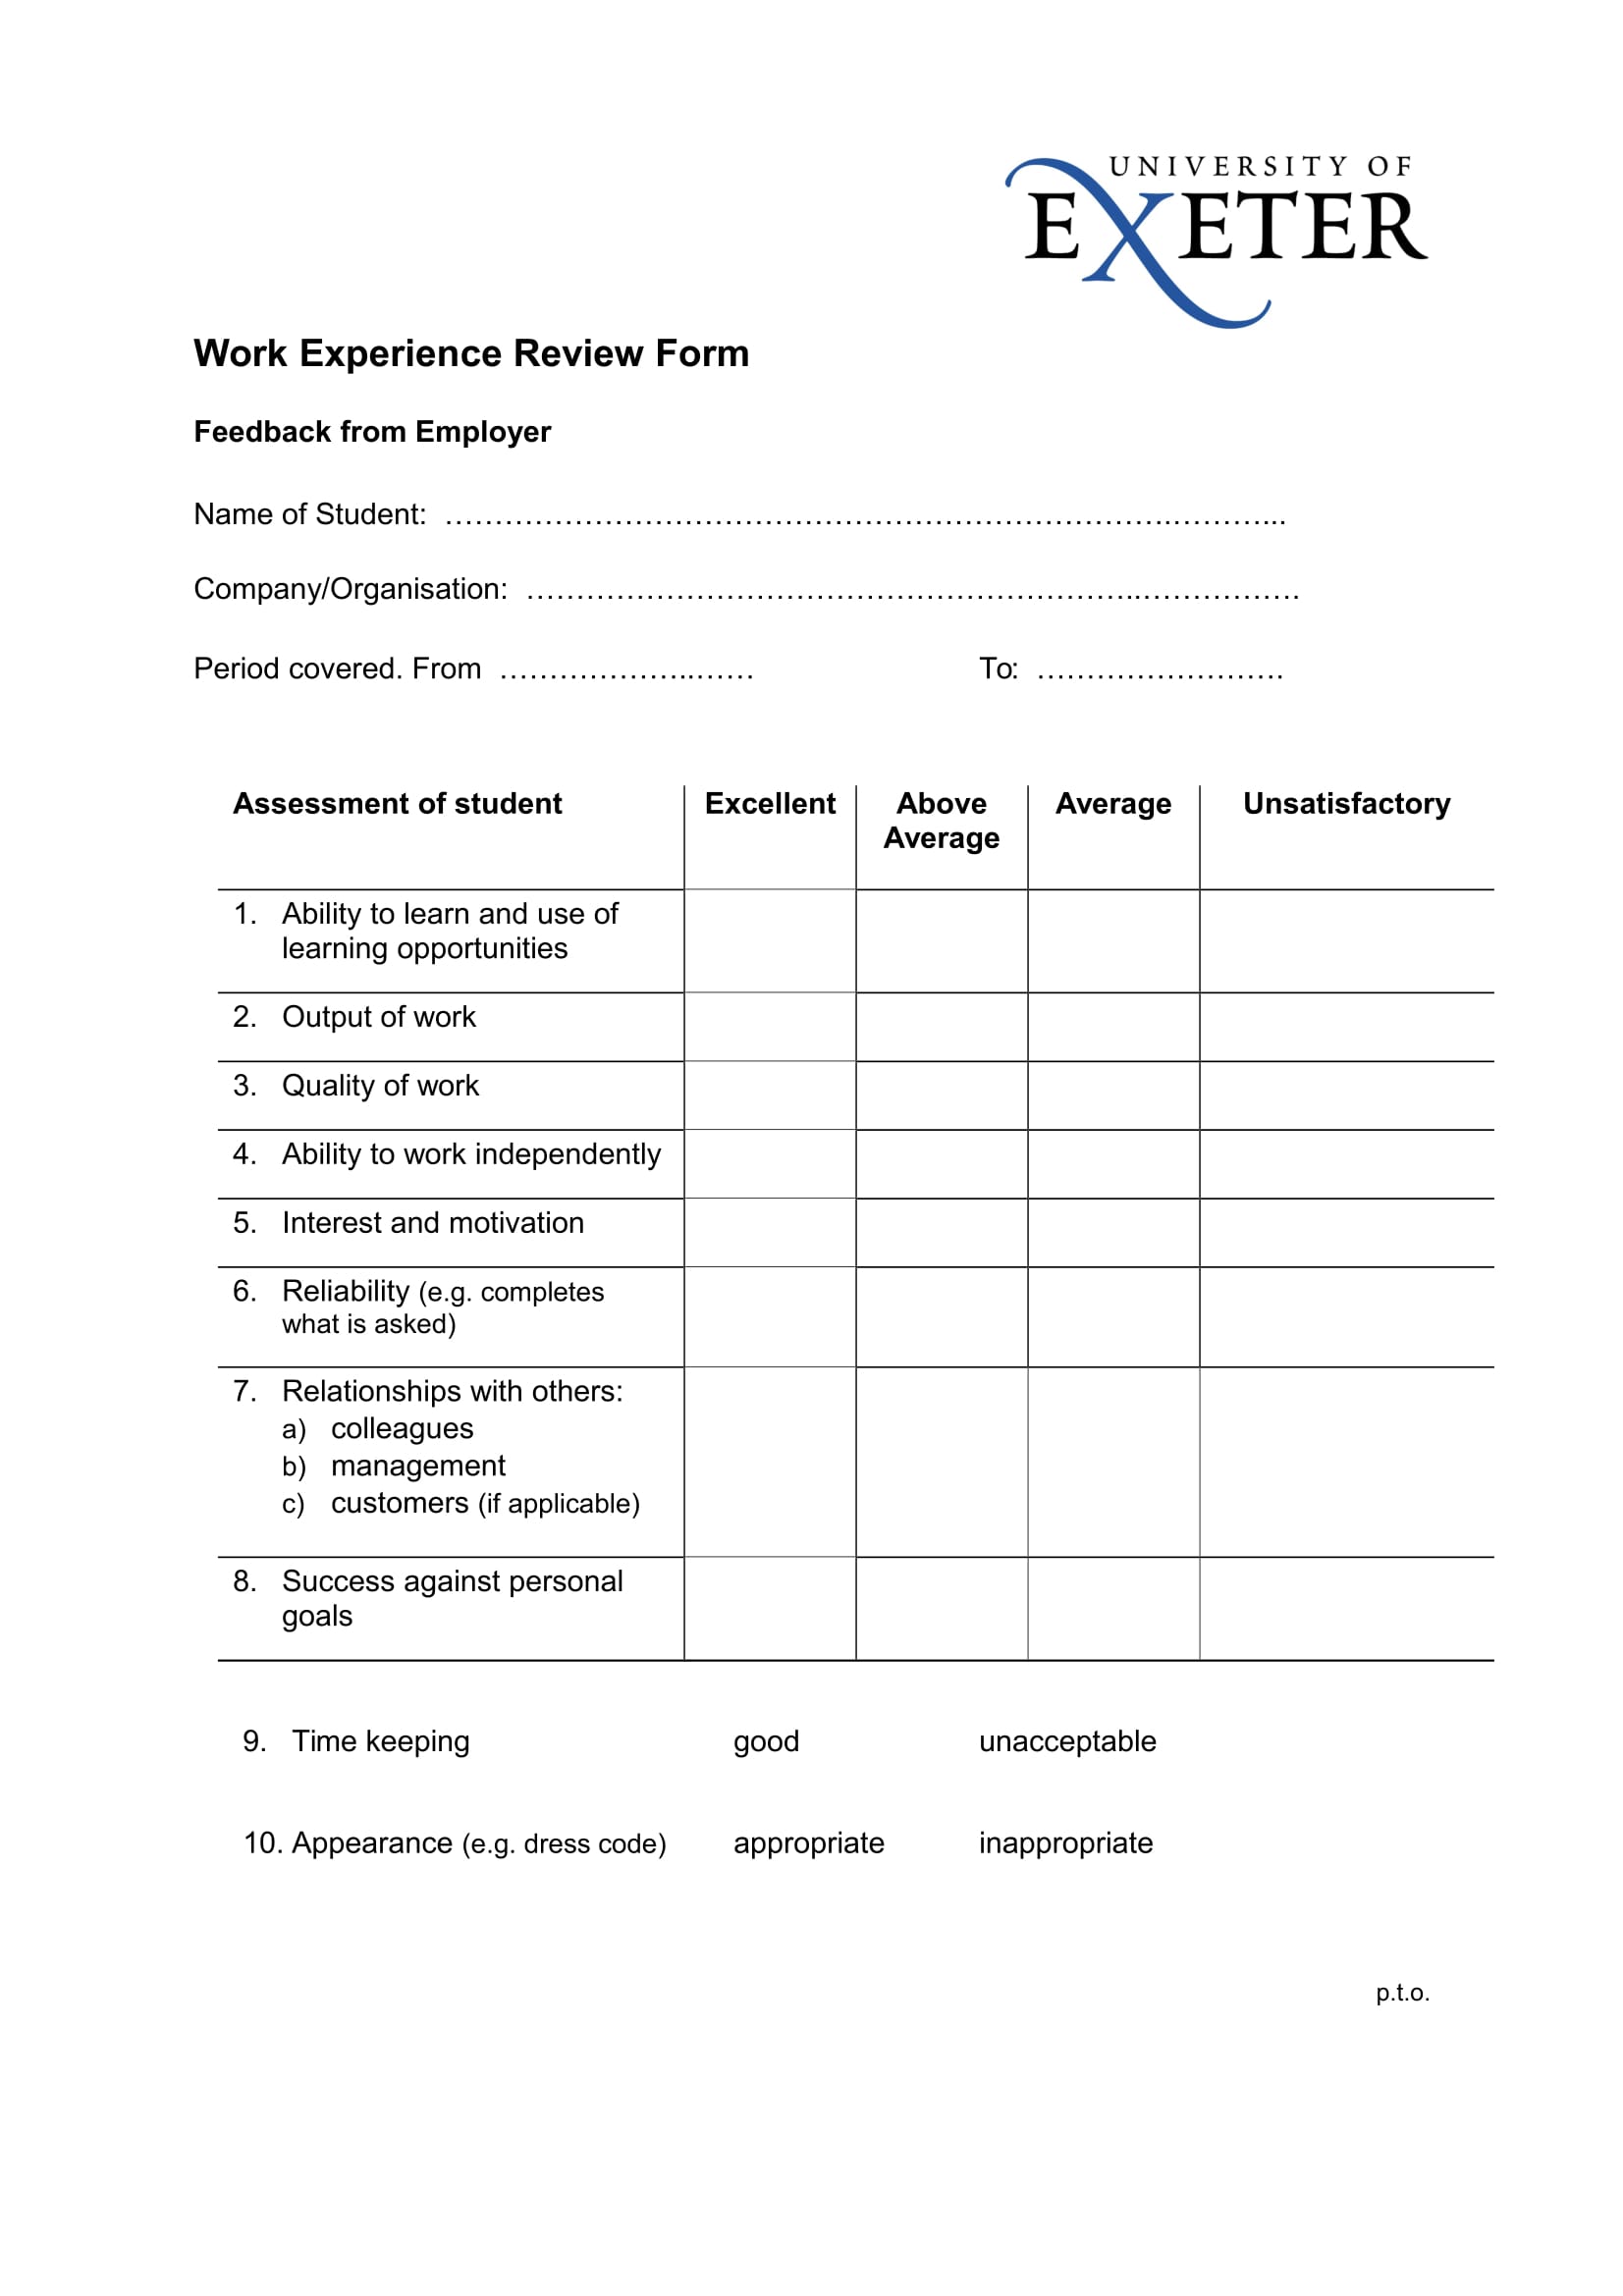 work experience review form 1